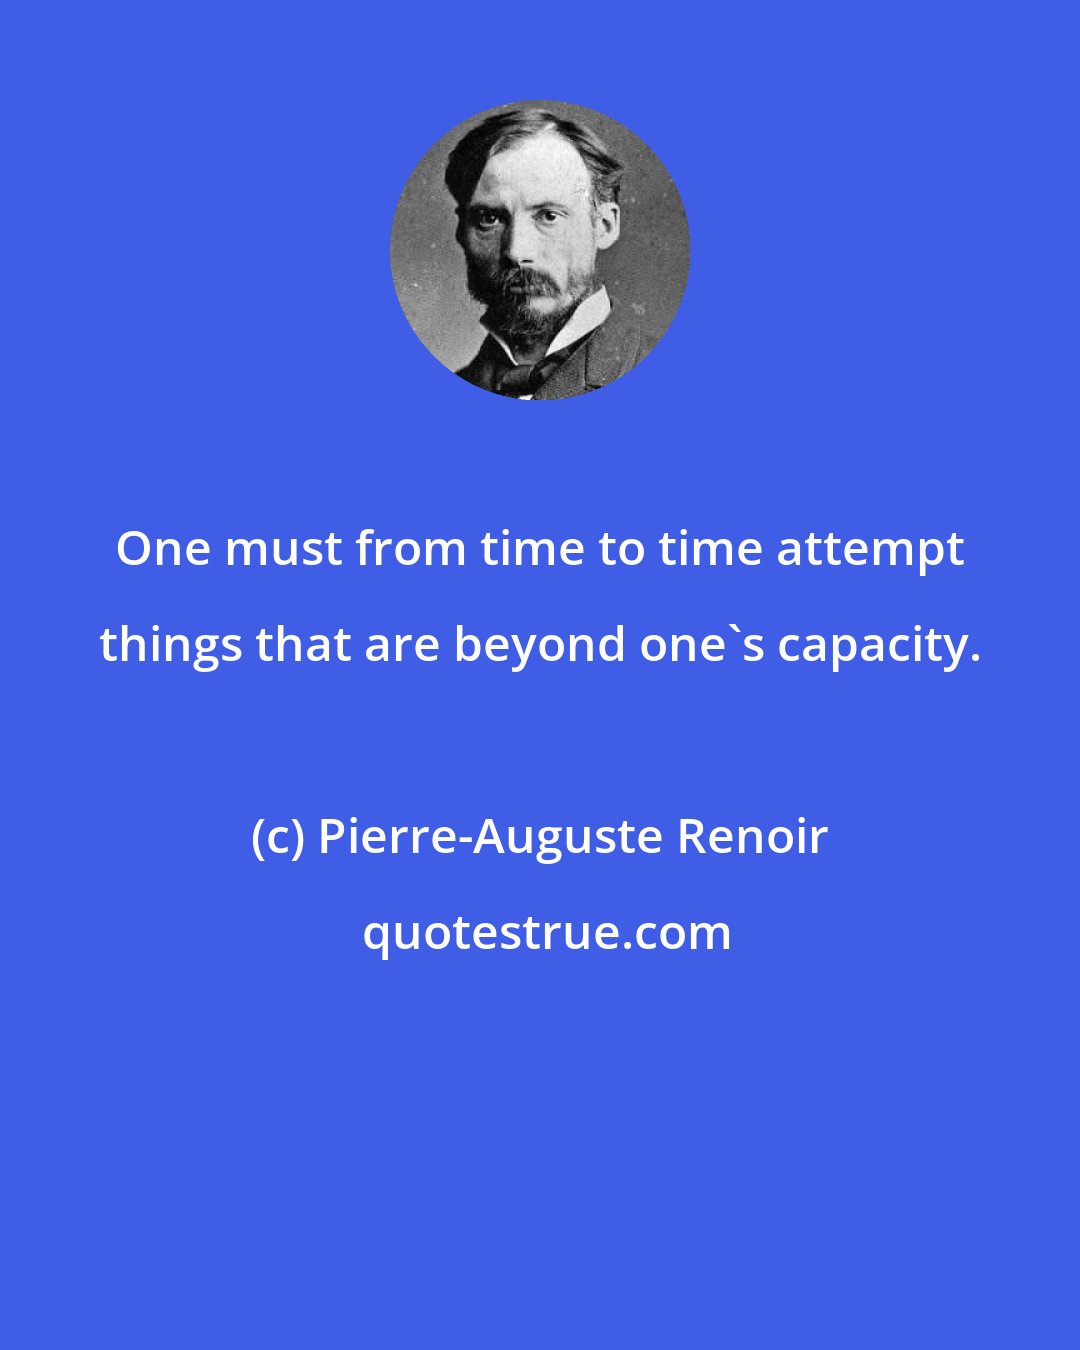 Pierre-Auguste Renoir: One must from time to time attempt things that are beyond one's capacity.